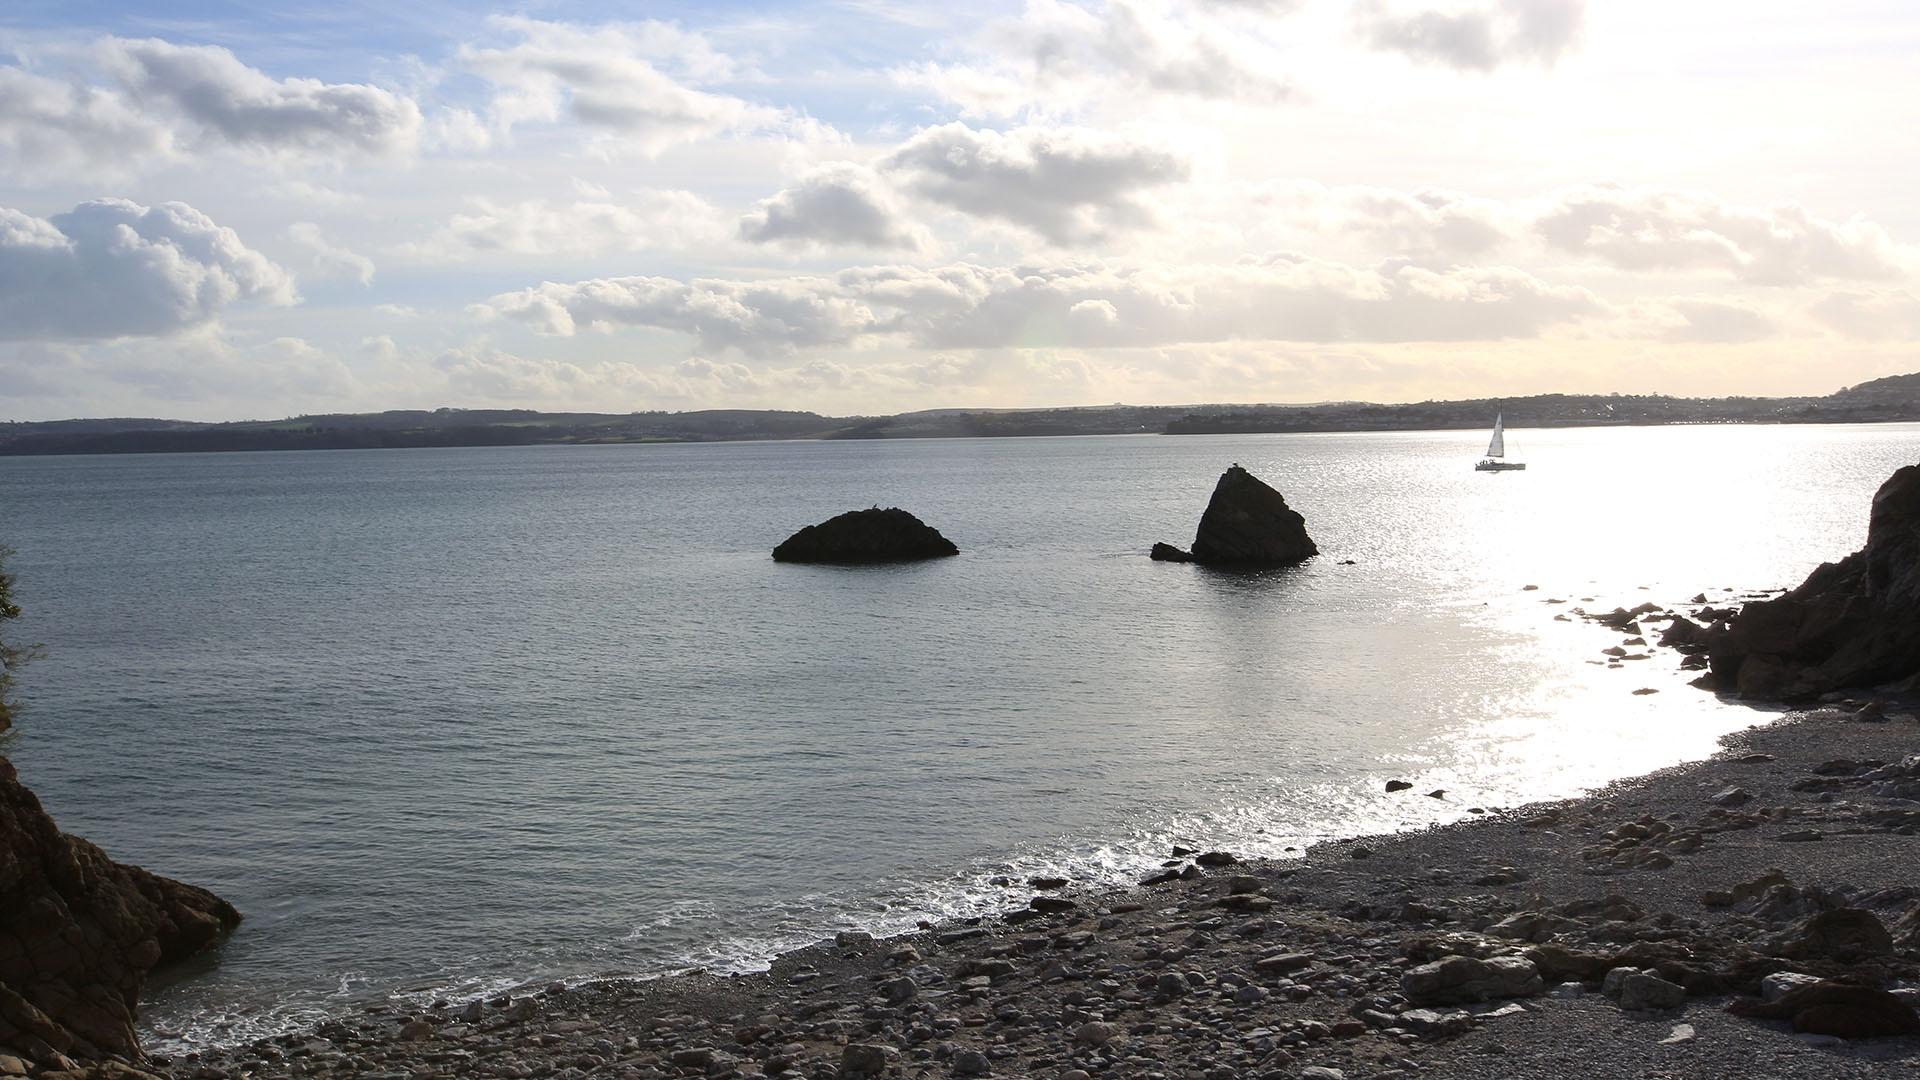 The bay at Torquay where Agatha Christie used to swim.